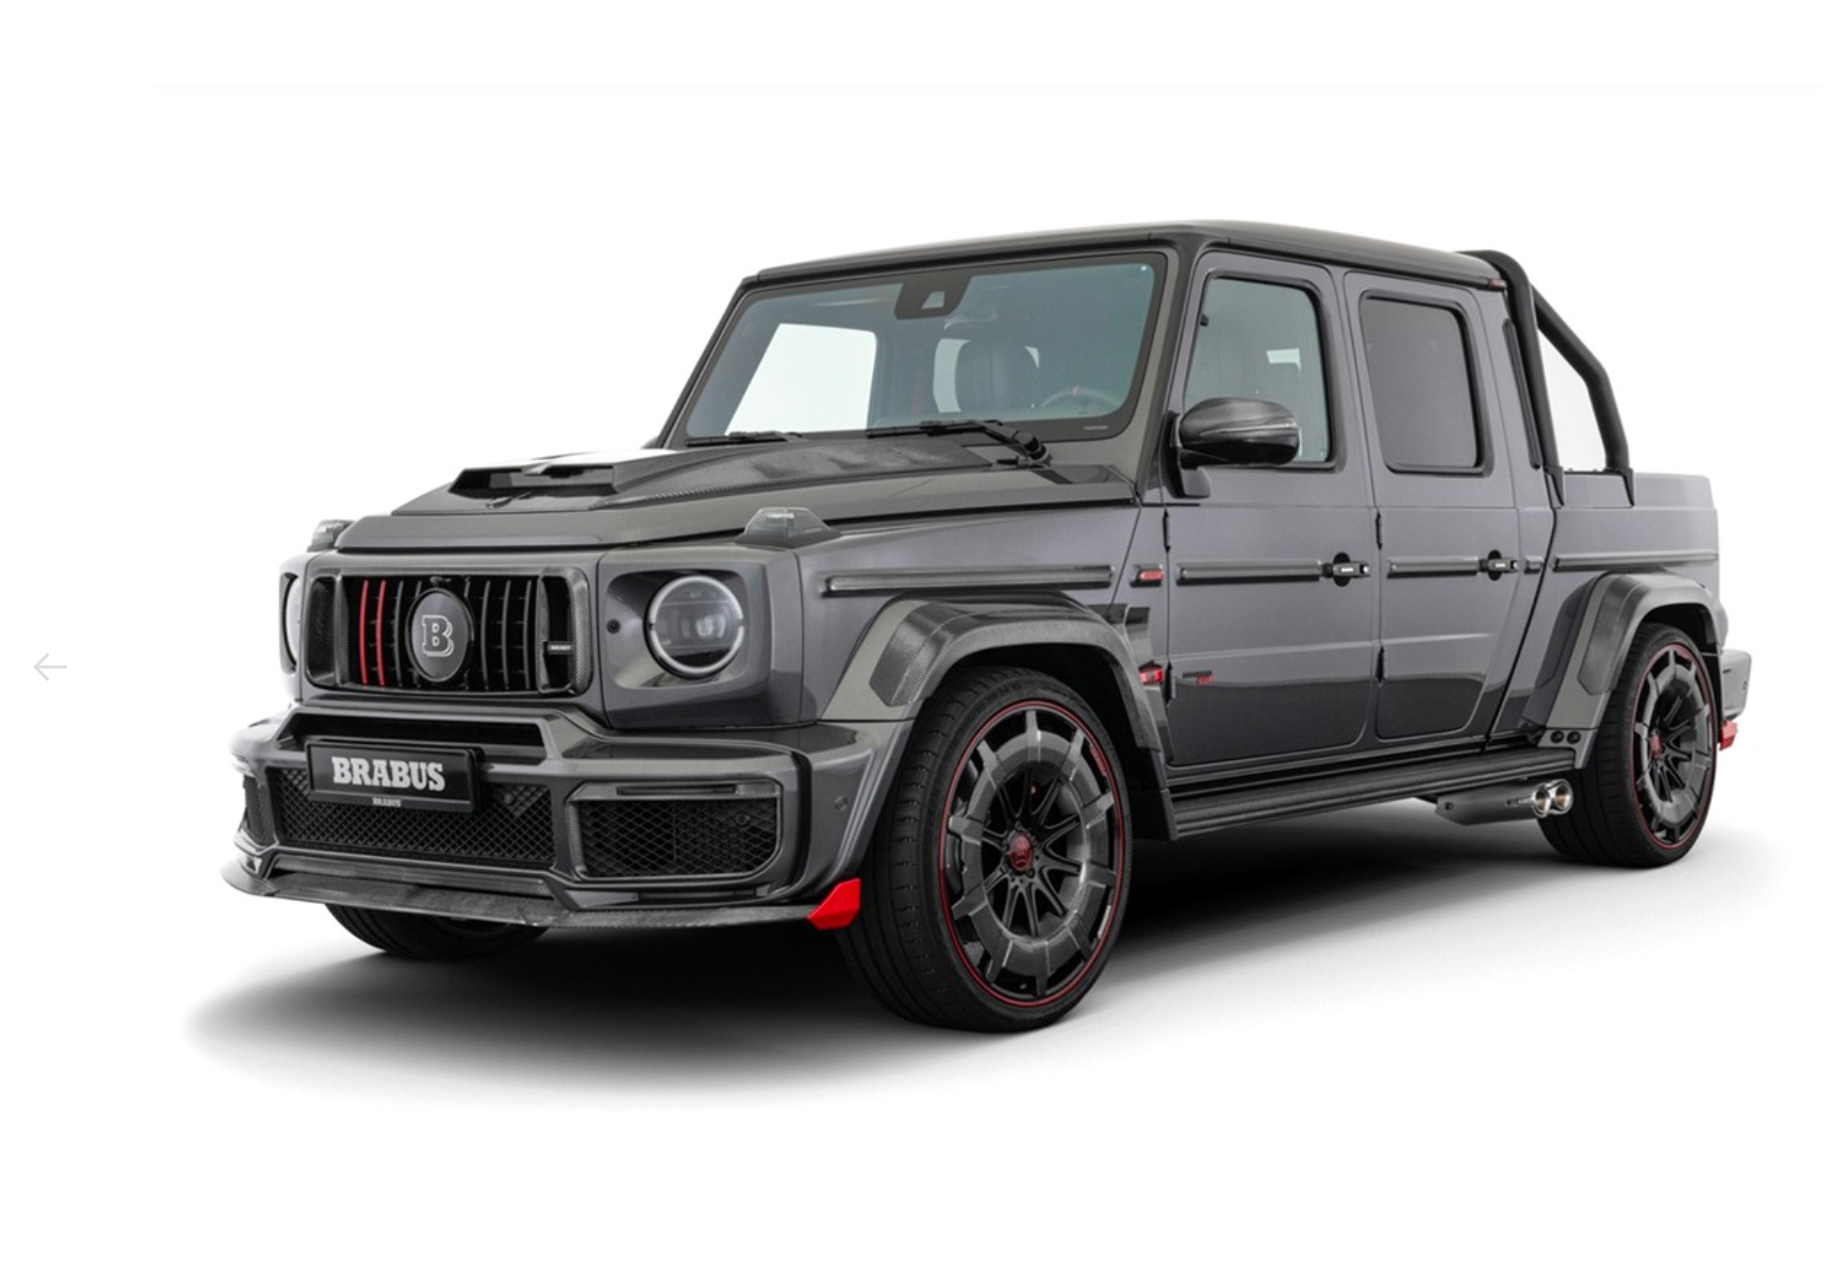 BRABUS Shows Off High-Performance ‘Rocket Edition’ Pickup Truck